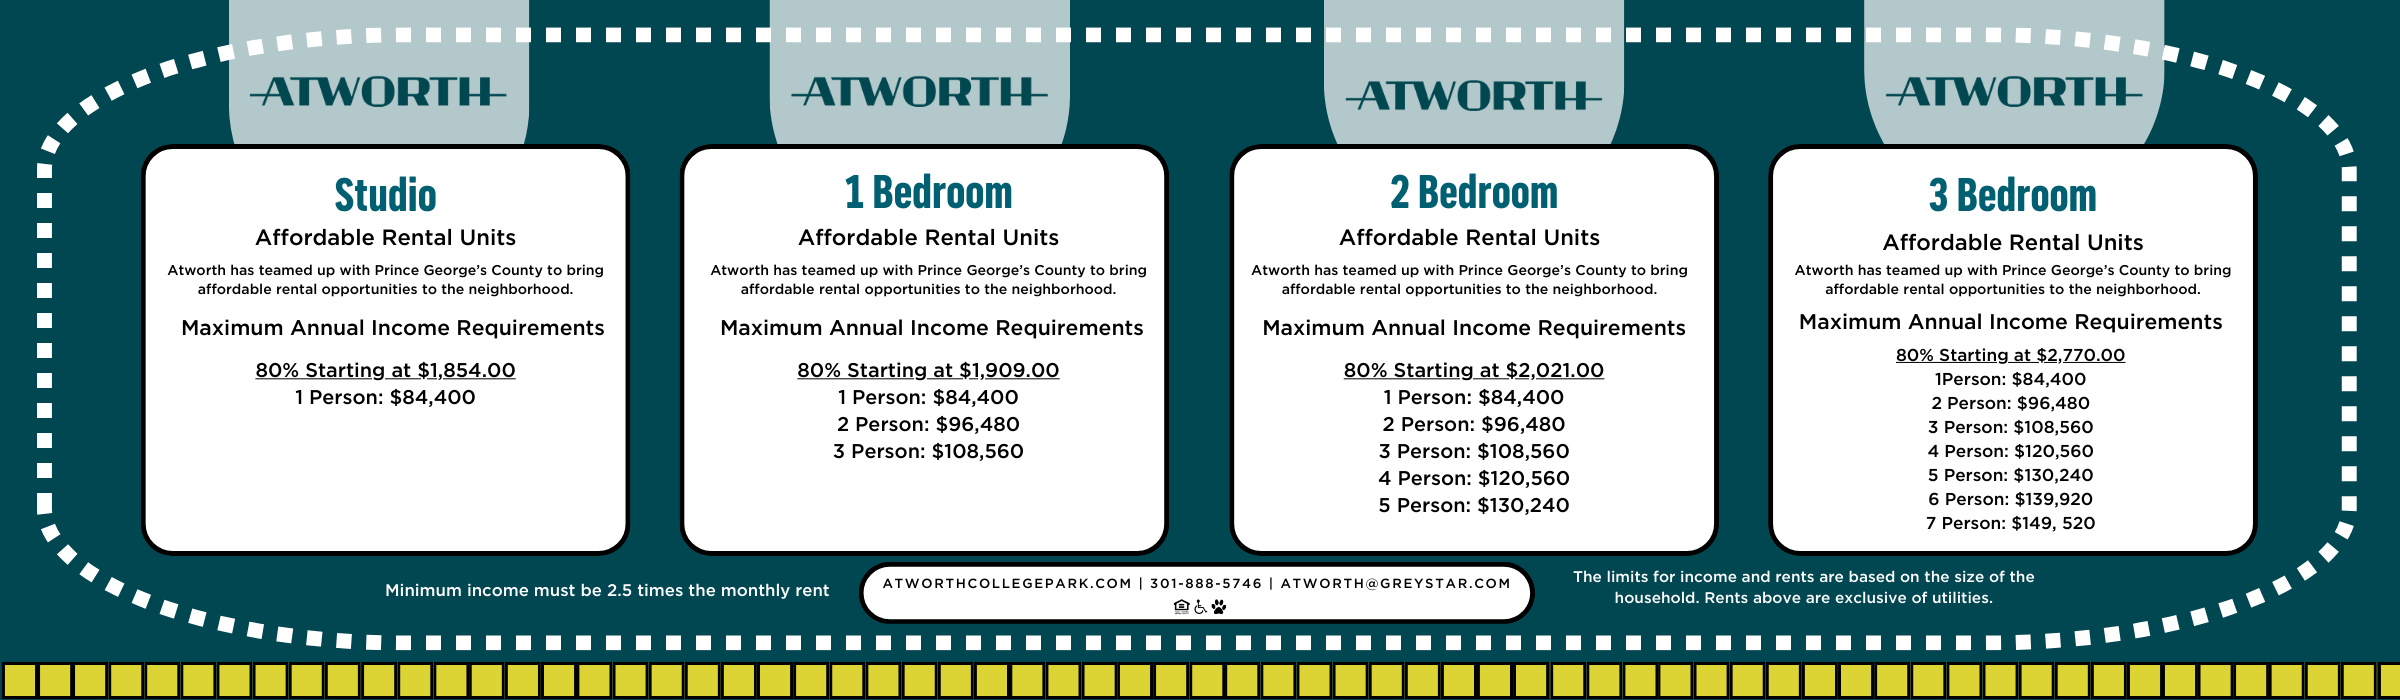 Income and Rent Requirements Image 3